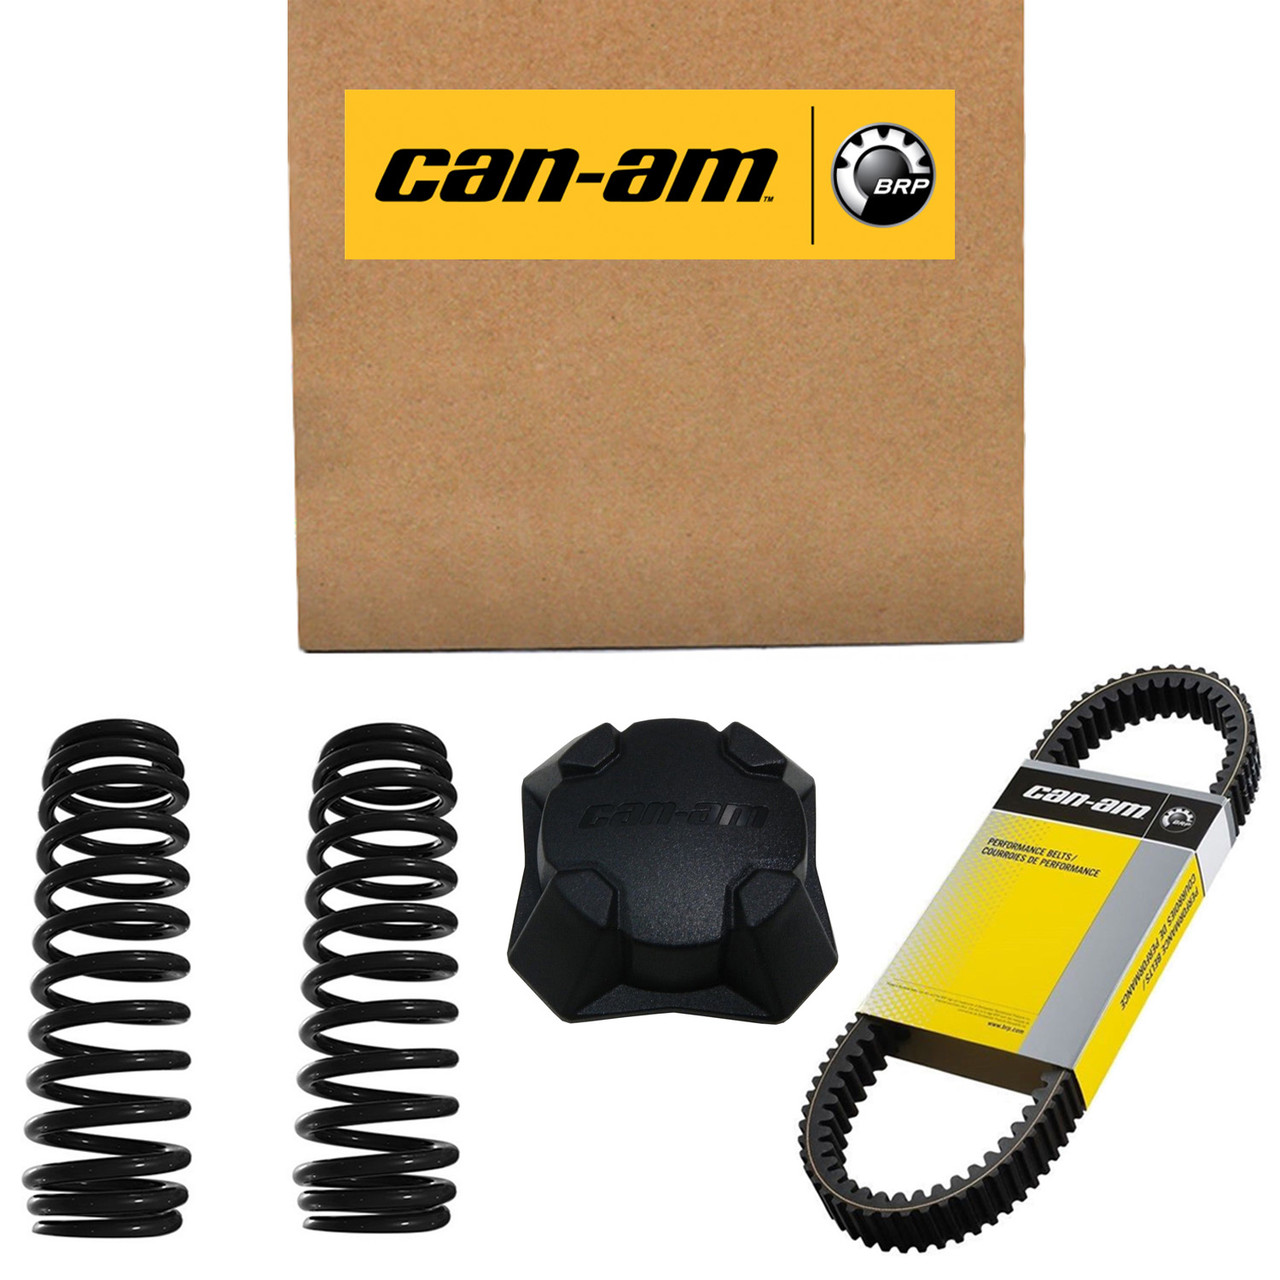 Can-Am New OEM Operator Guide 2018 English, 219001880